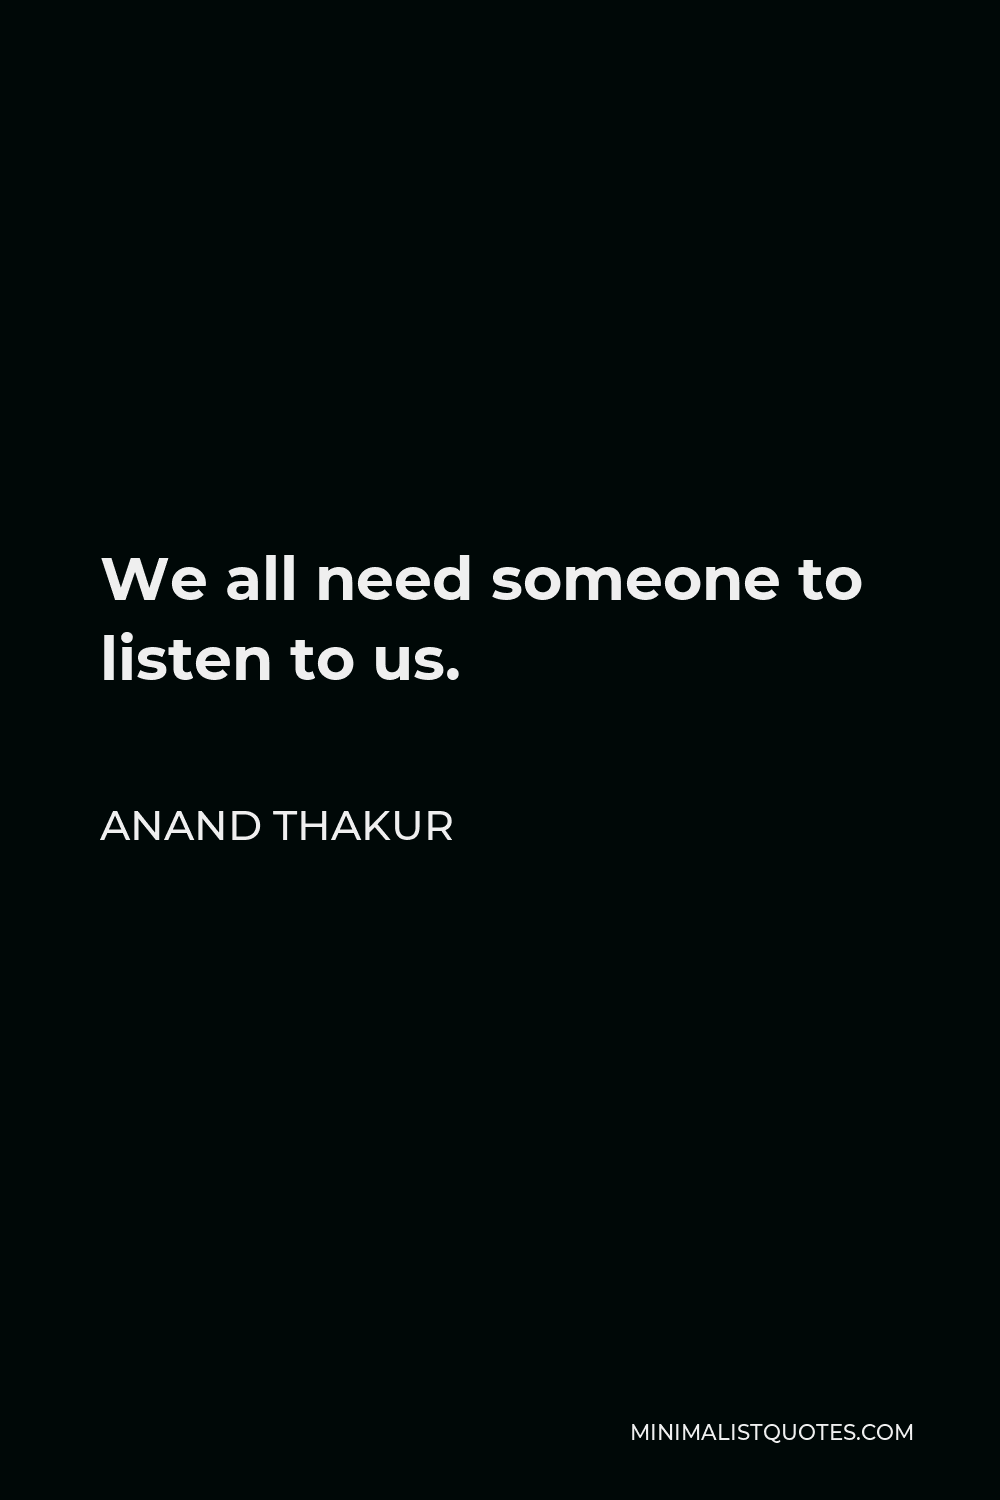 Anand Thakur Quote - We all need someone to listen to us.